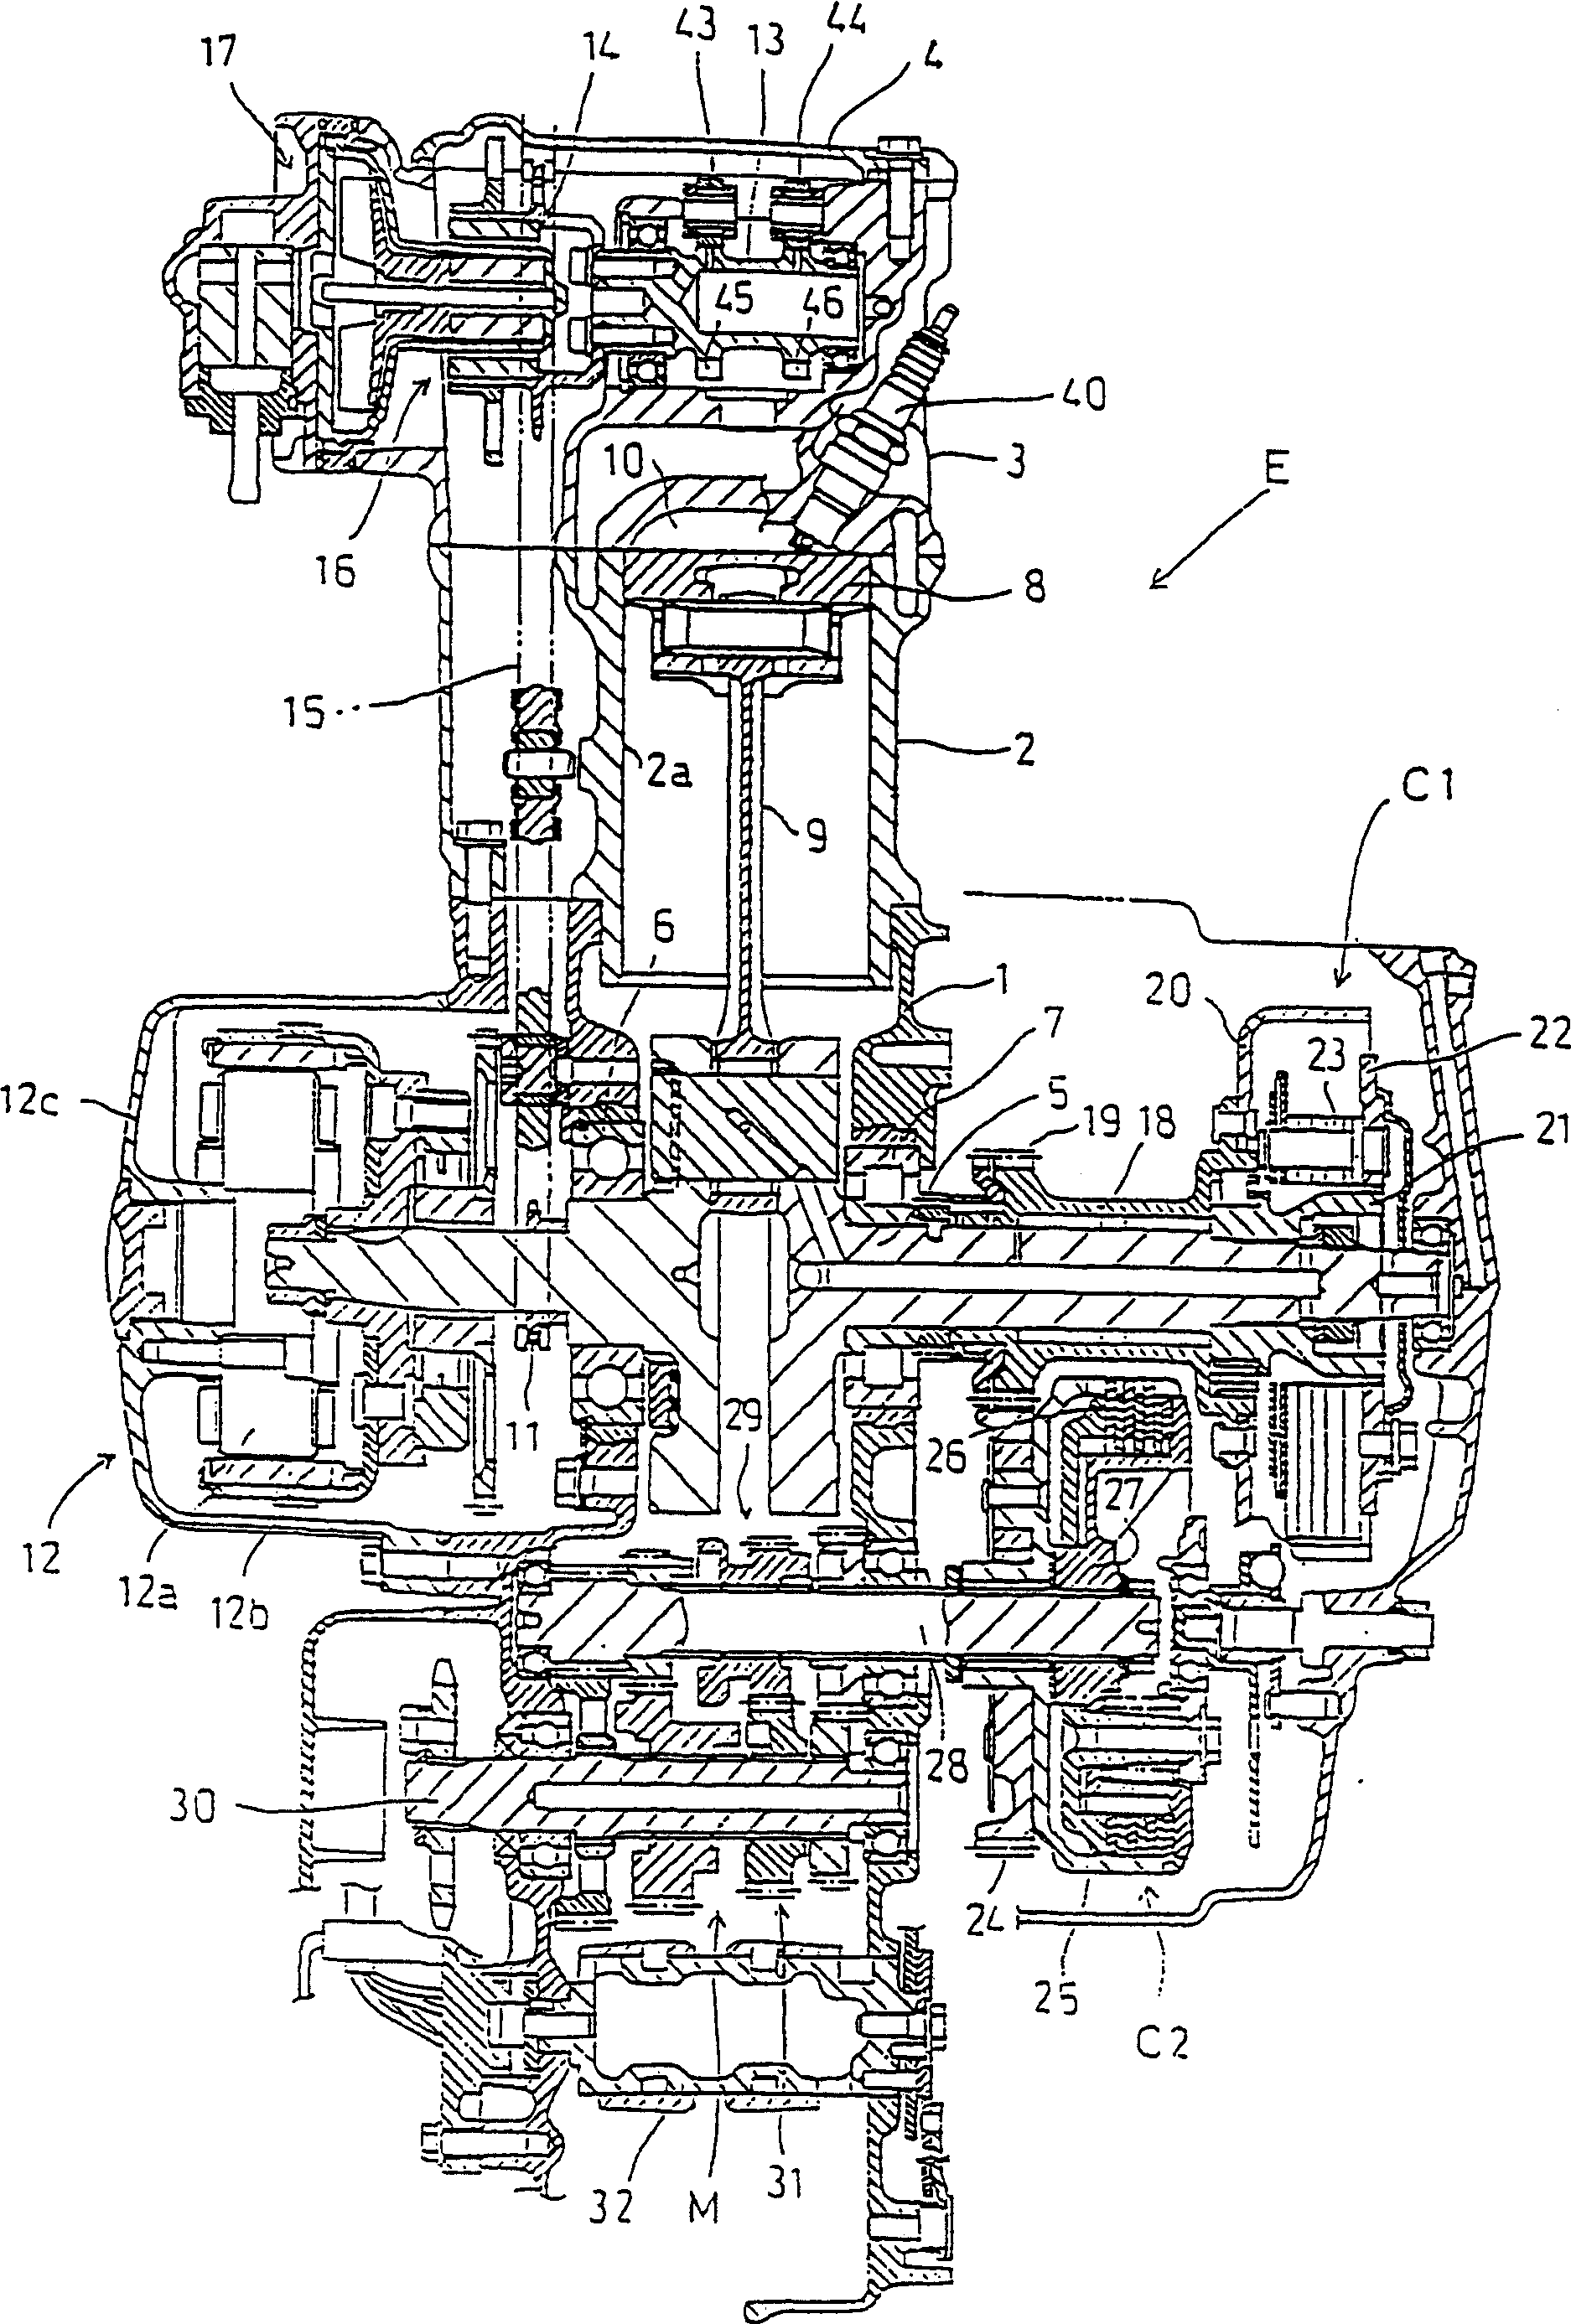 Spontaneous intake type internal combustion engine for vehicles